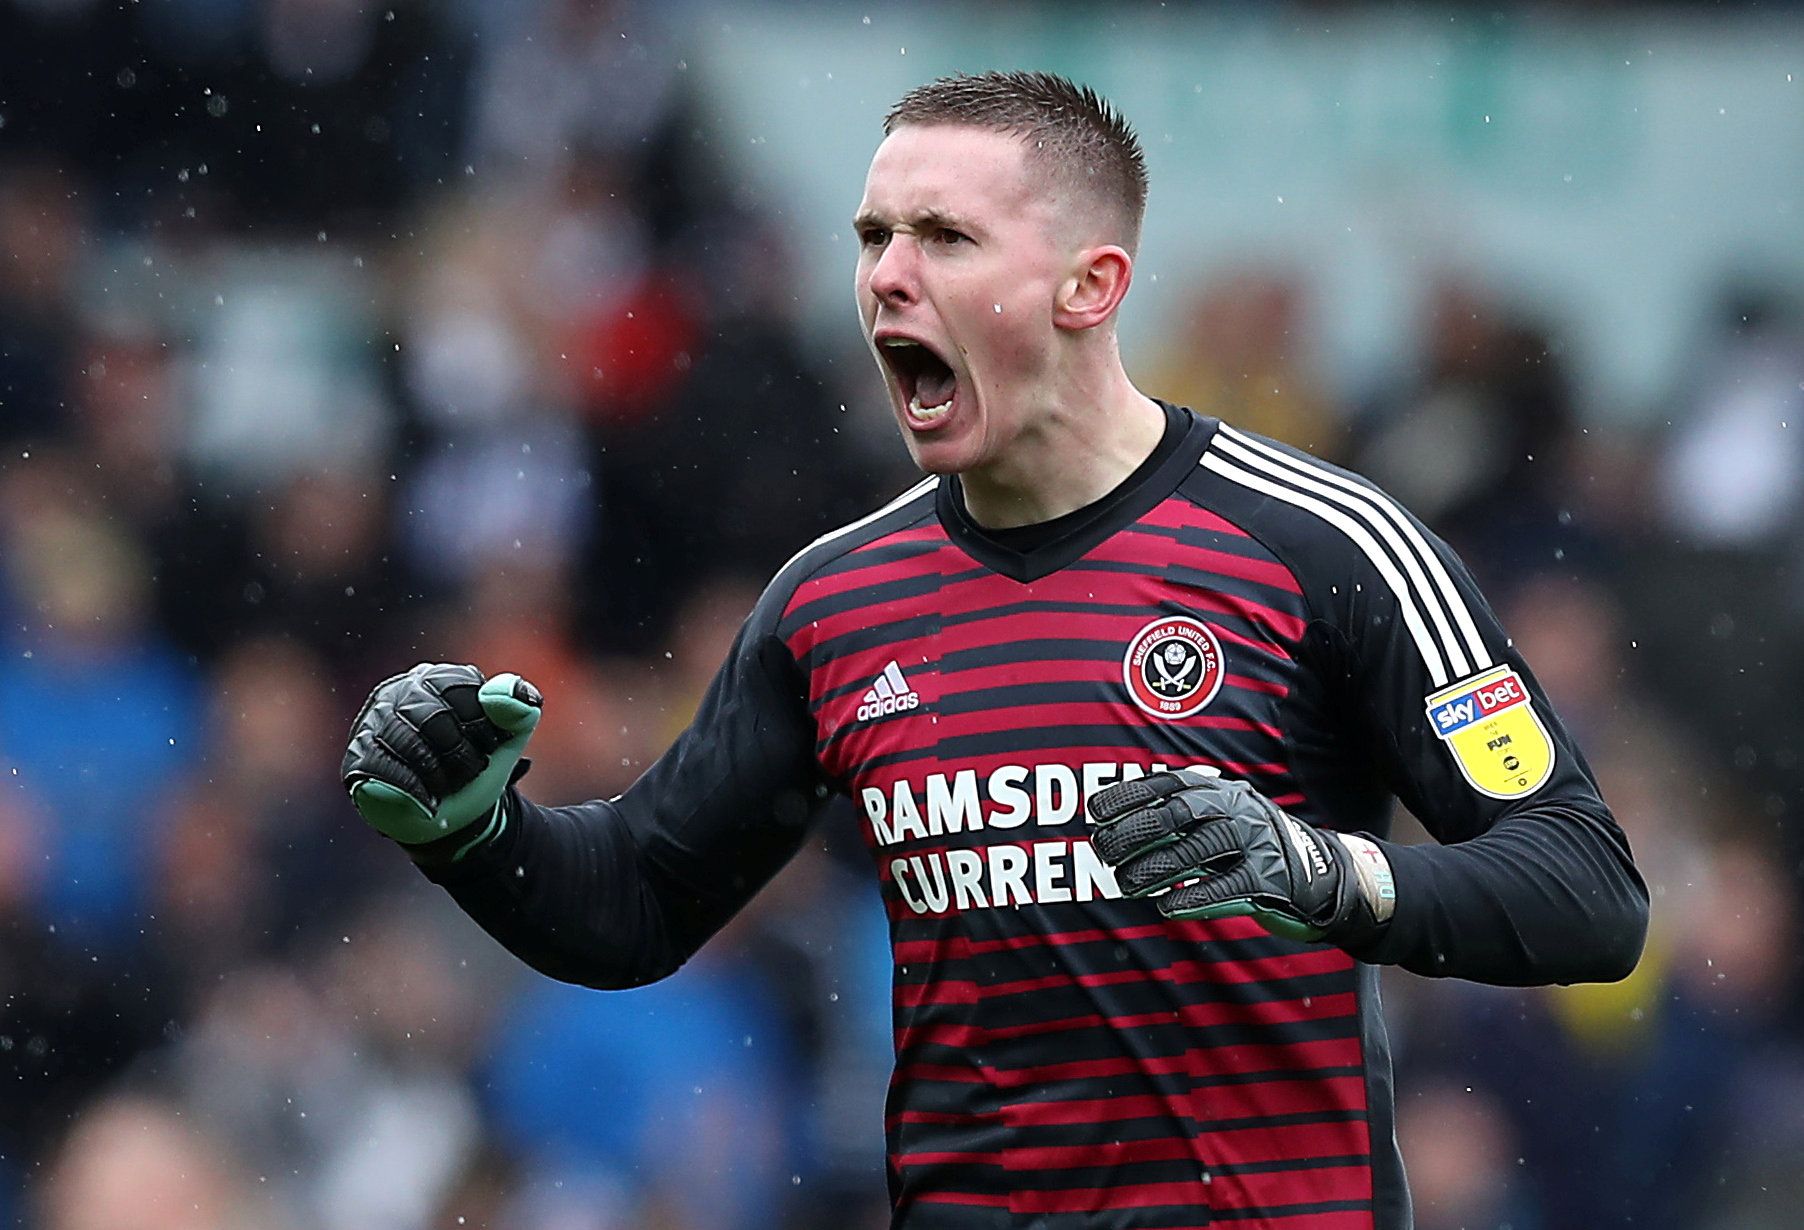 Soccer Football - Championship - Leeds United v Sheffield United - Elland Road, Leeds, Britain - March 16, 2019   Sheffield United's Dean Henderson celebrates at the end of the match   Action Images/John Clifton    EDITORIAL USE ONLY. No use with unauthorized audio, video, data, fixture lists, club/league logos or "live" services. Online in-match use limited to 75 images, no video emulation. No use in betting, games or single club/league/player publications.  Please contact your account represen